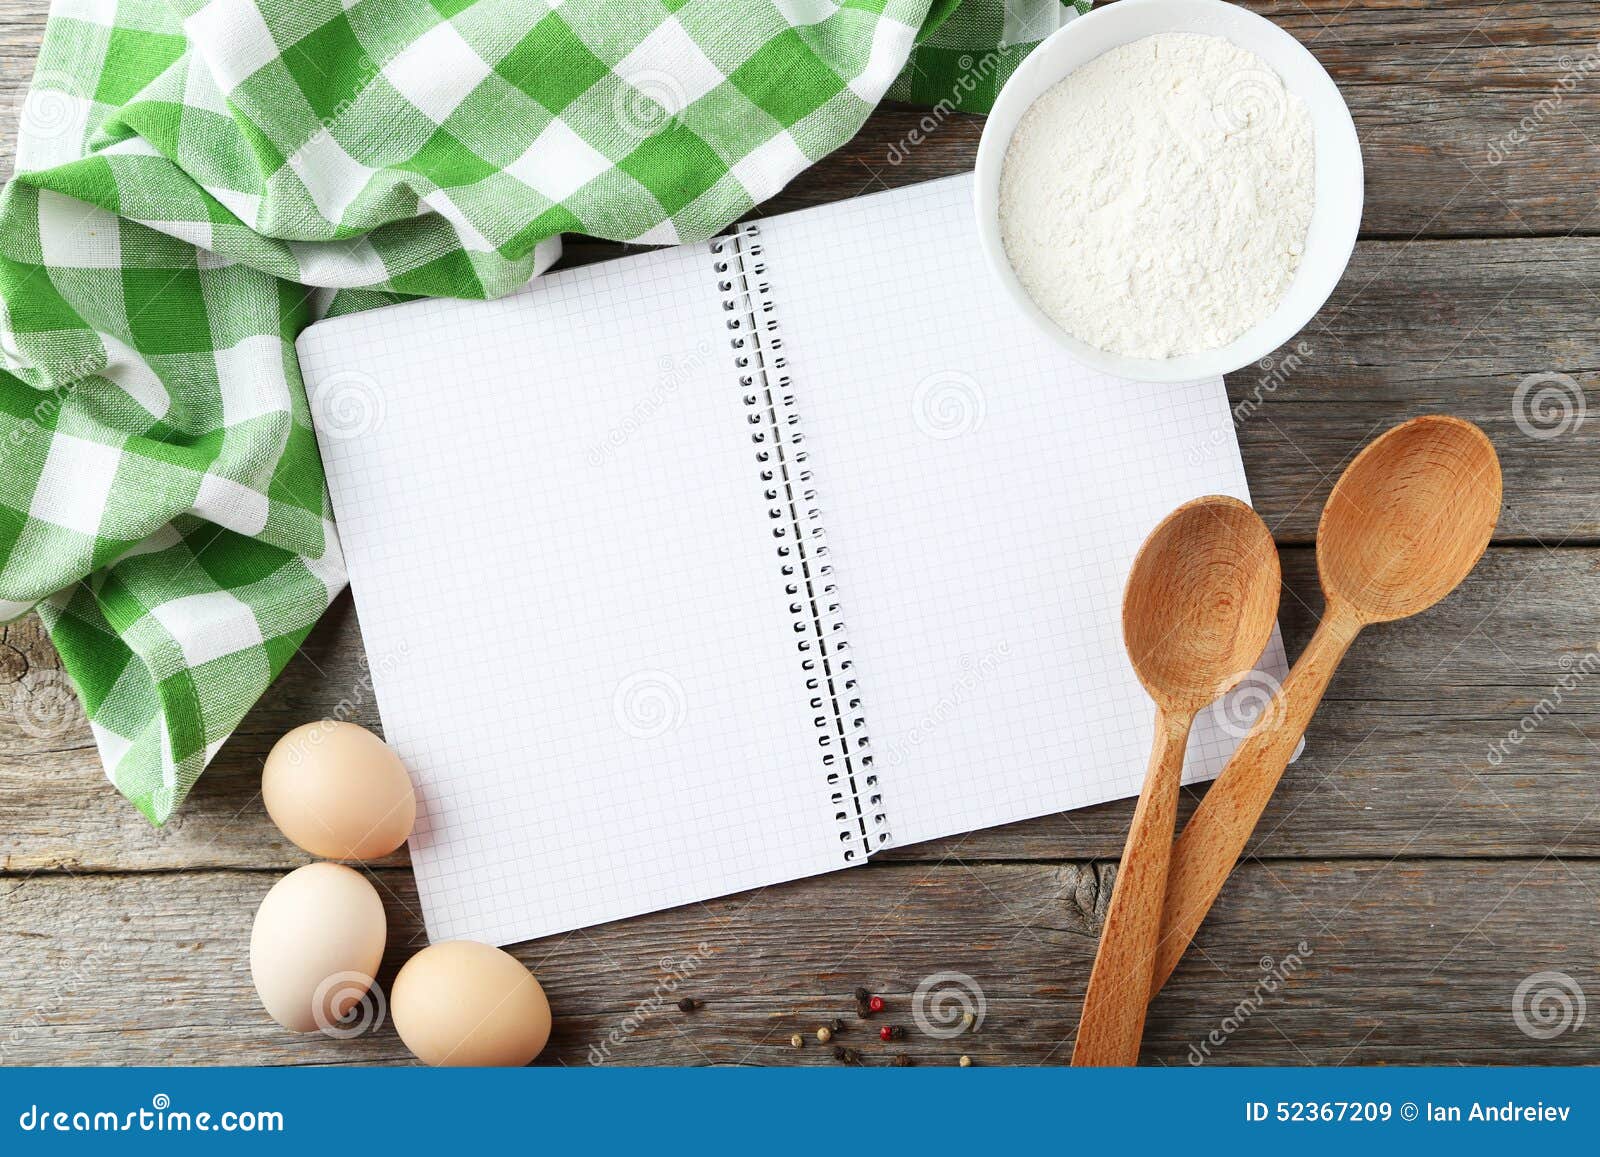 Open blank recipe book stock image. Image of cookery - 52367209